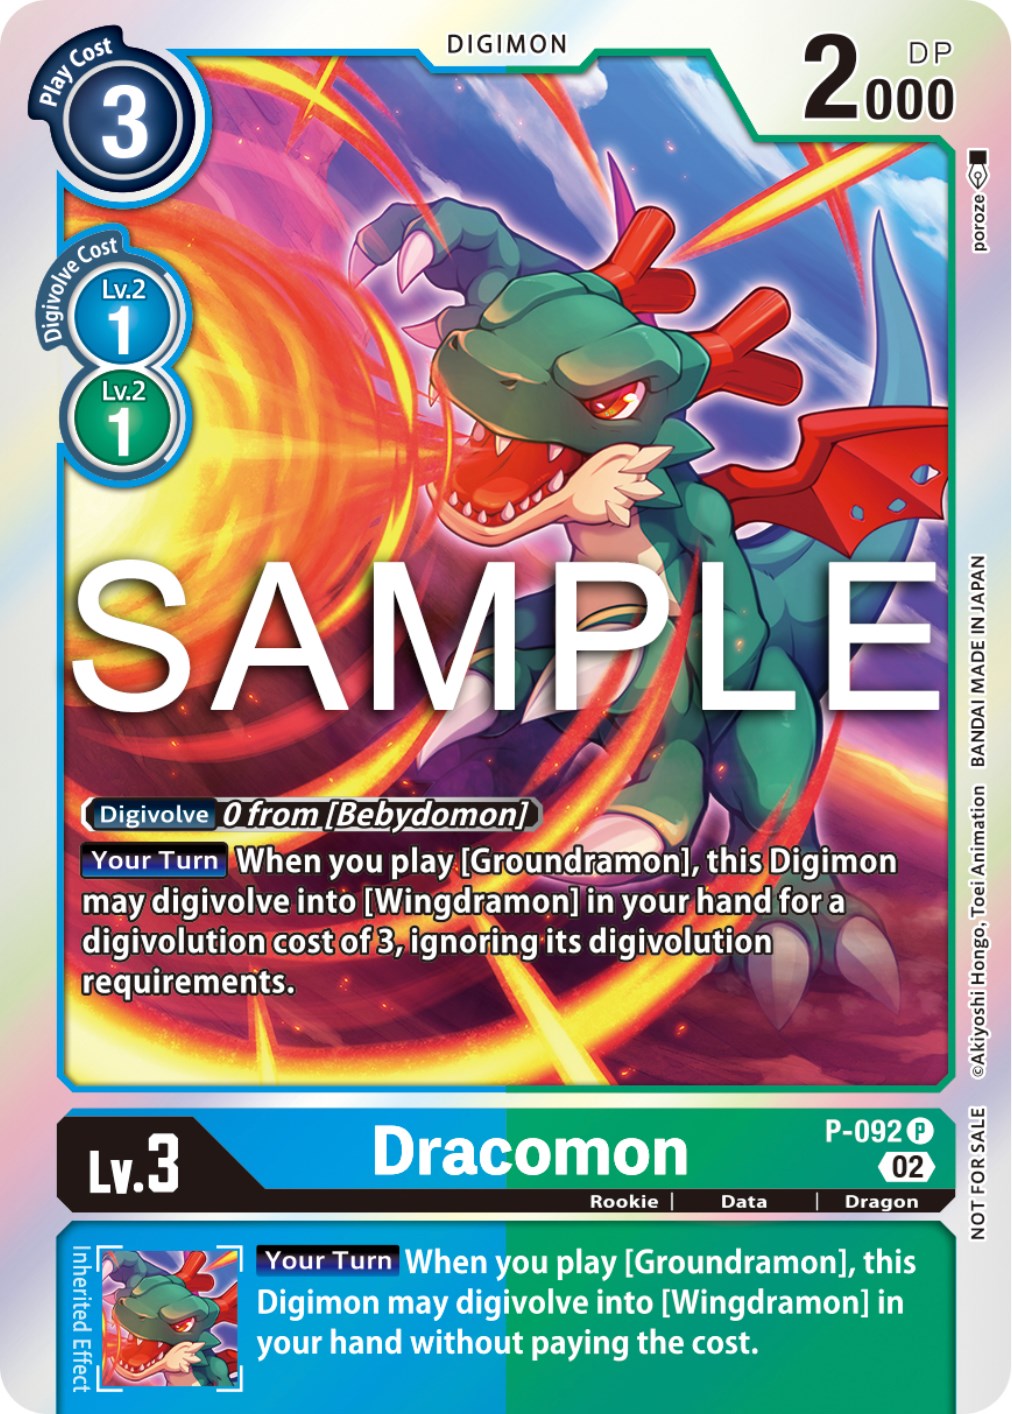 Dracomon [P-092] - P-092 (3rd Anniversary Update Pack) [Promotional Cards] | Shuffle n Cut Hobbies & Games